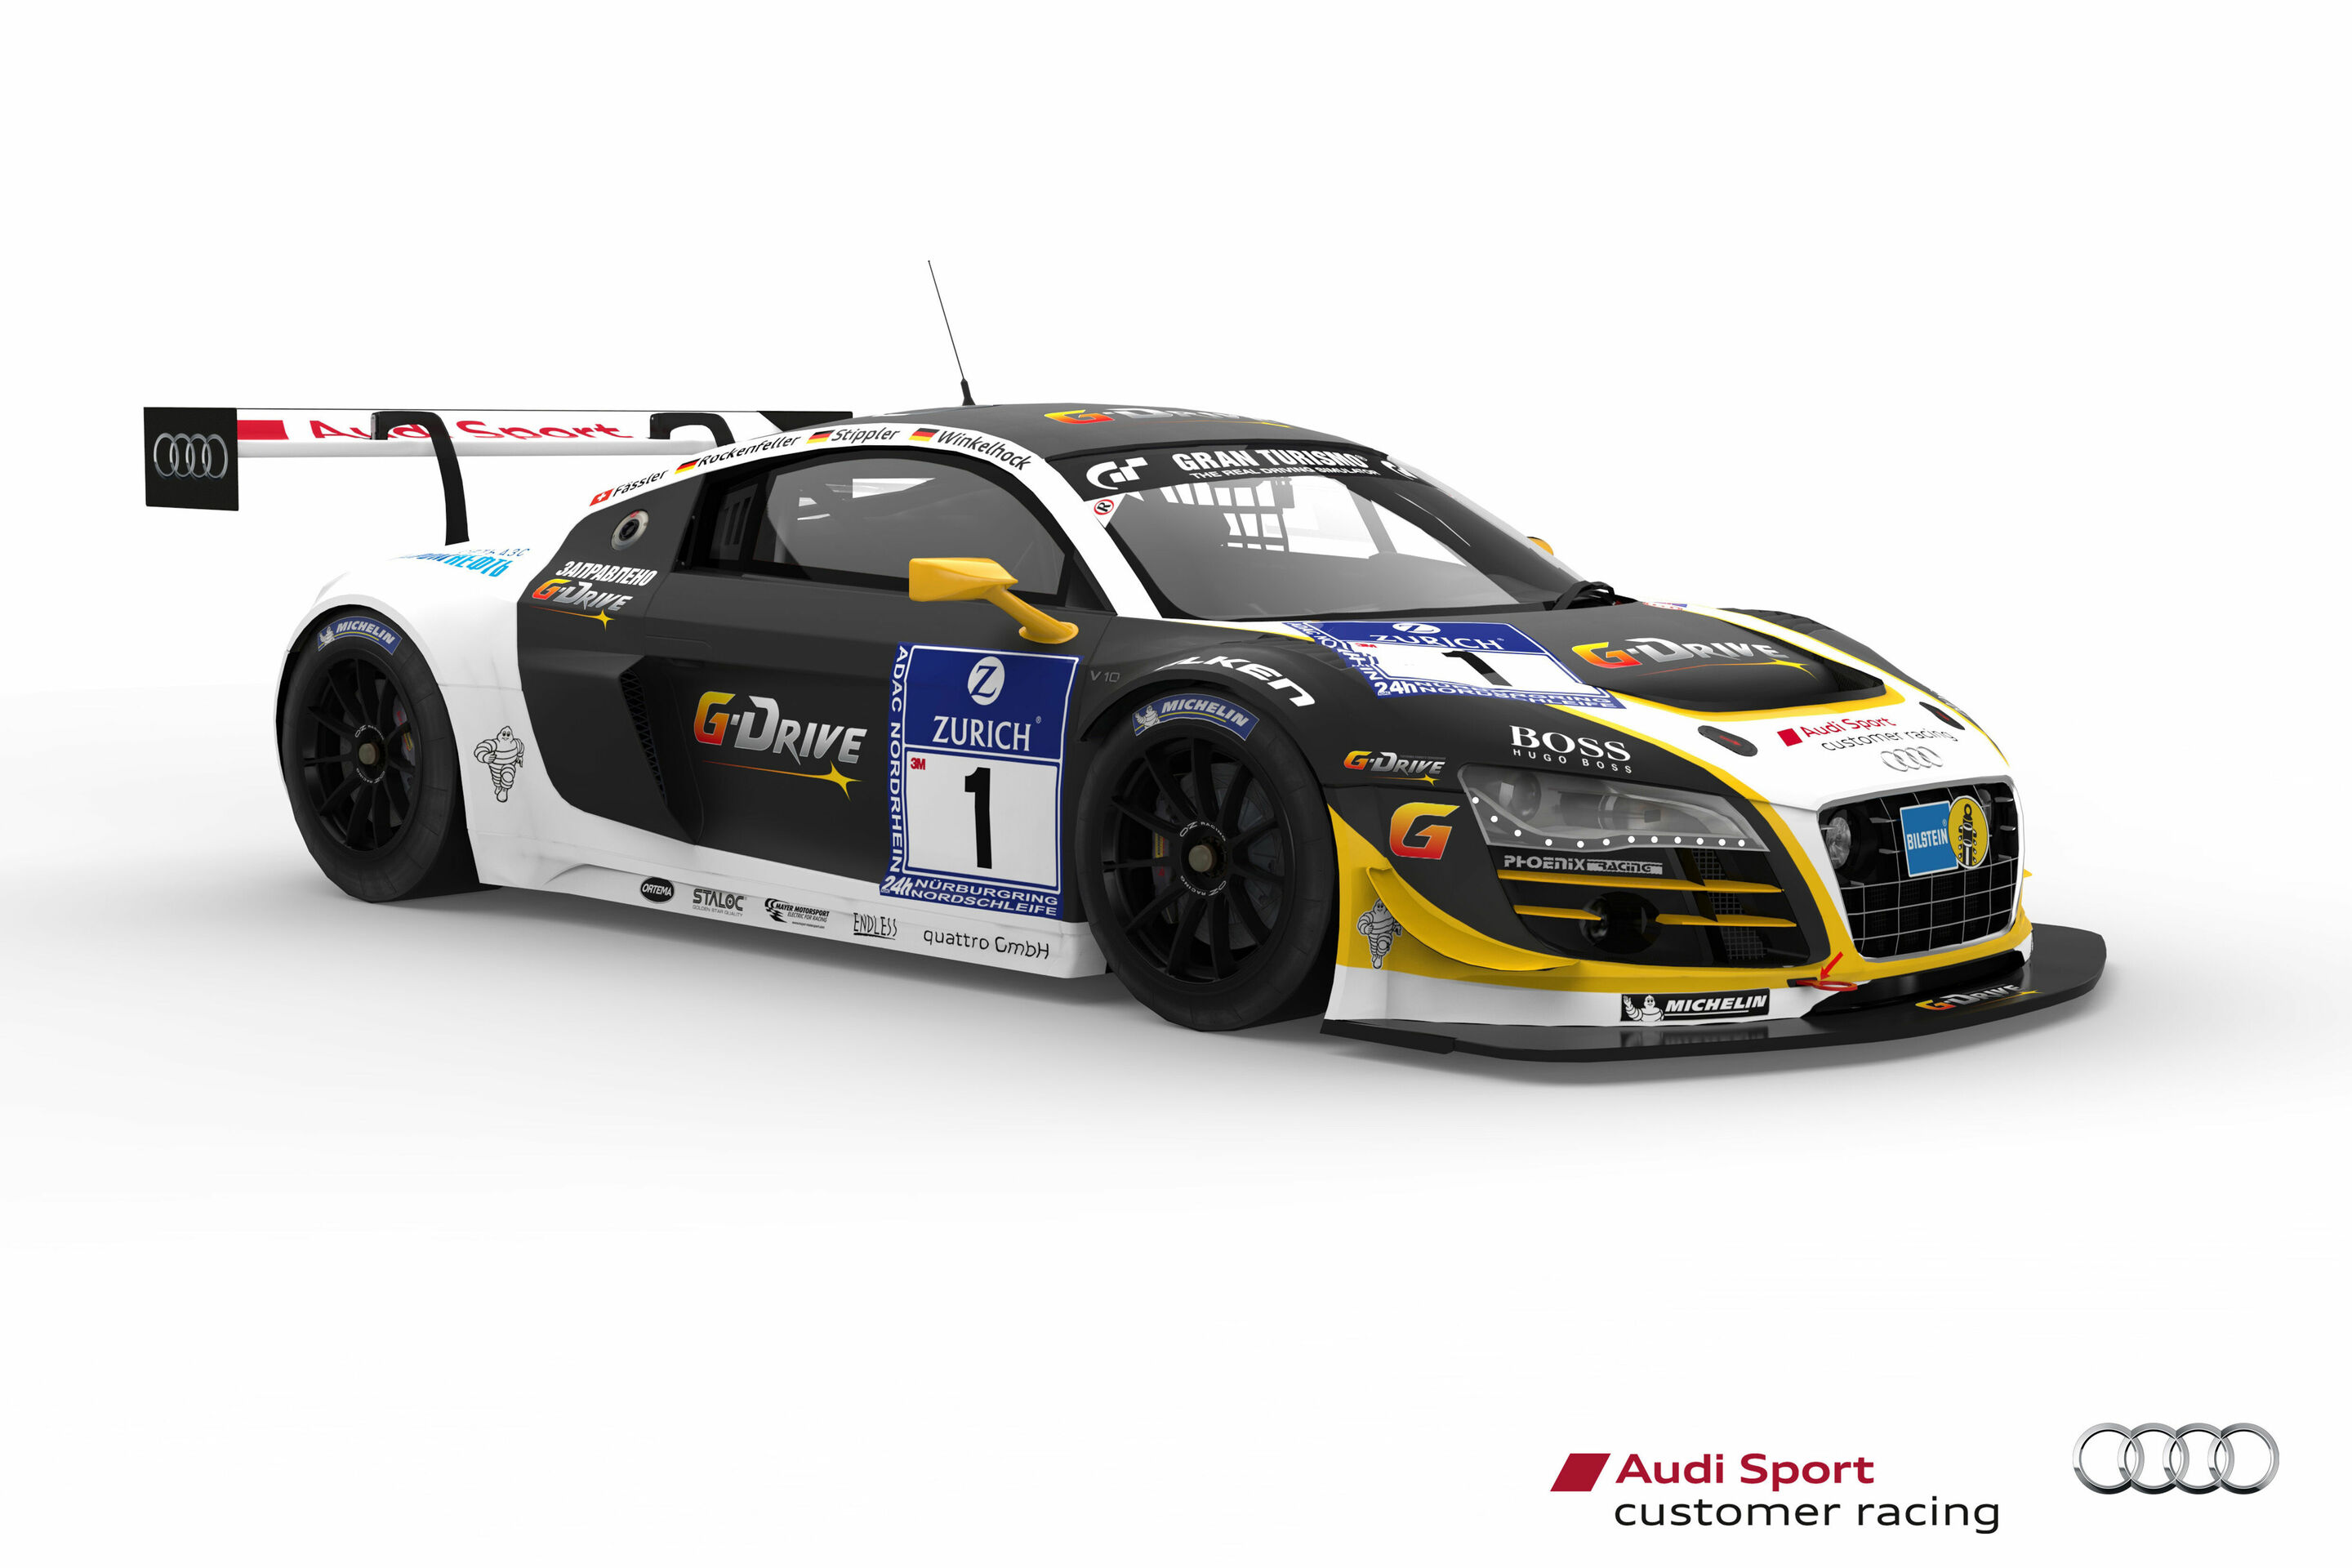 Audi customers aim for victory at the Nürburgring